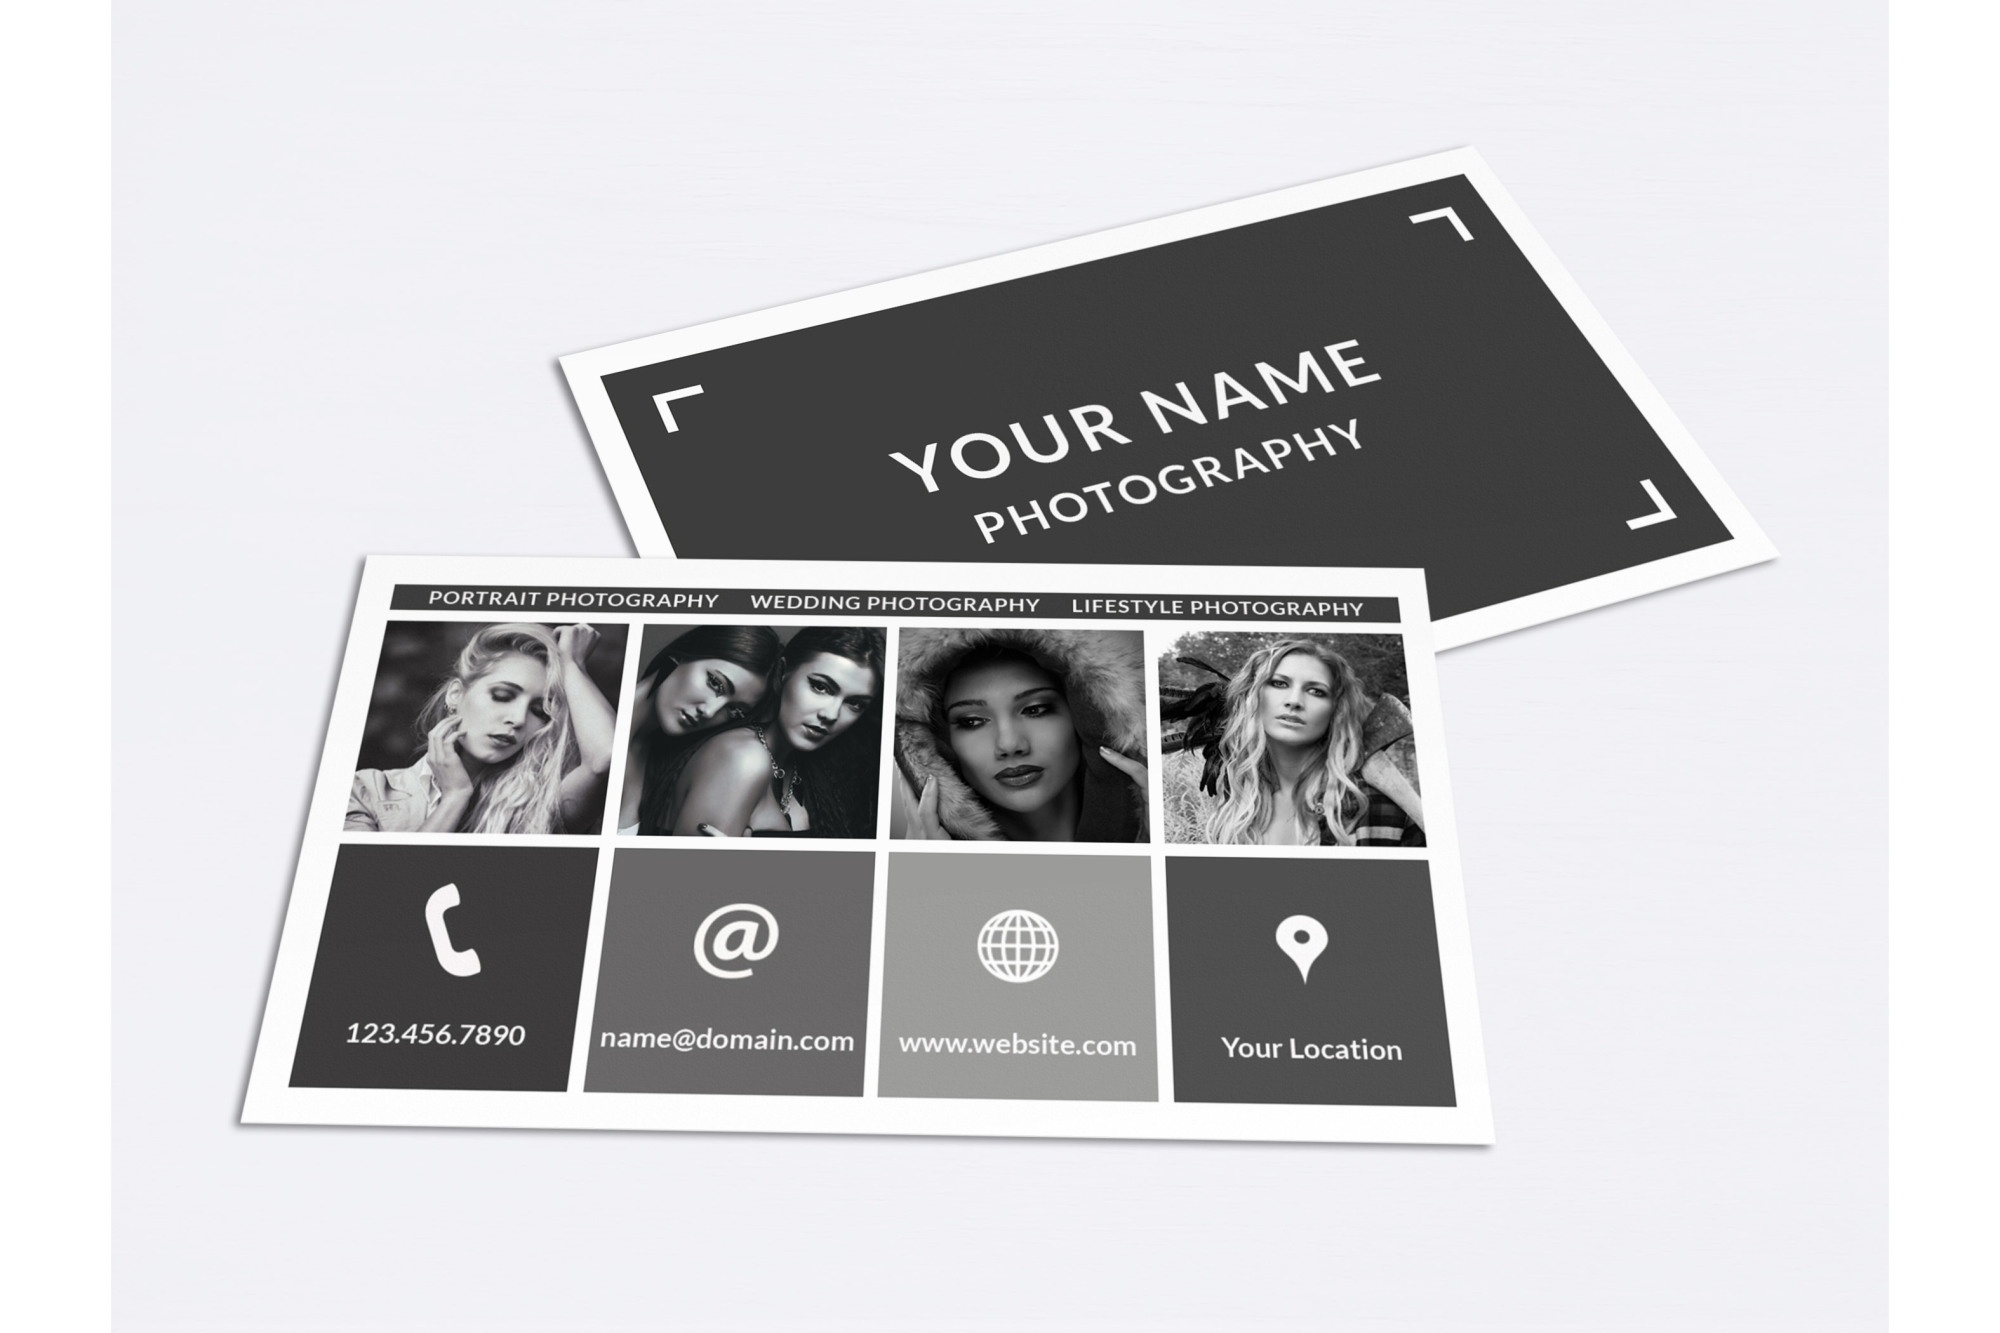 Business Card Template Photoshop - 50 Free Photoshop Business Card Within Business Card Size Photoshop Template